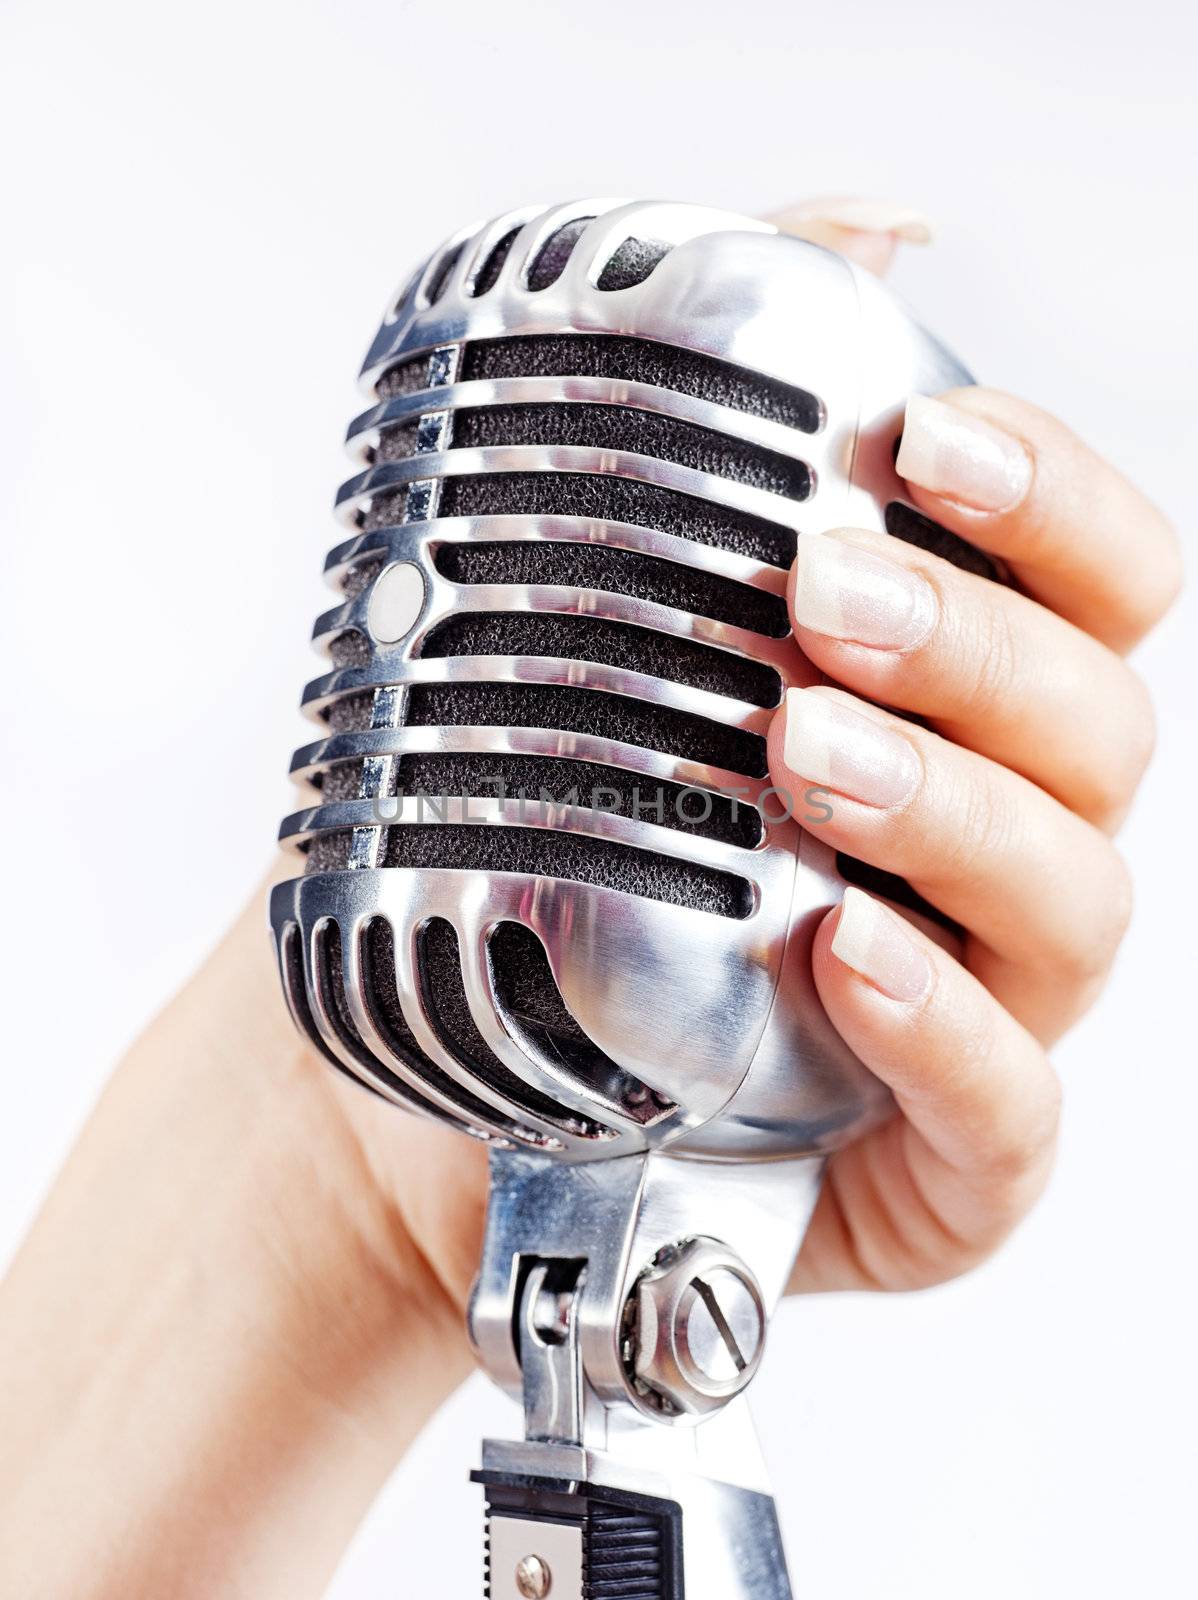 Big retro microphone in woman's hand by imarin